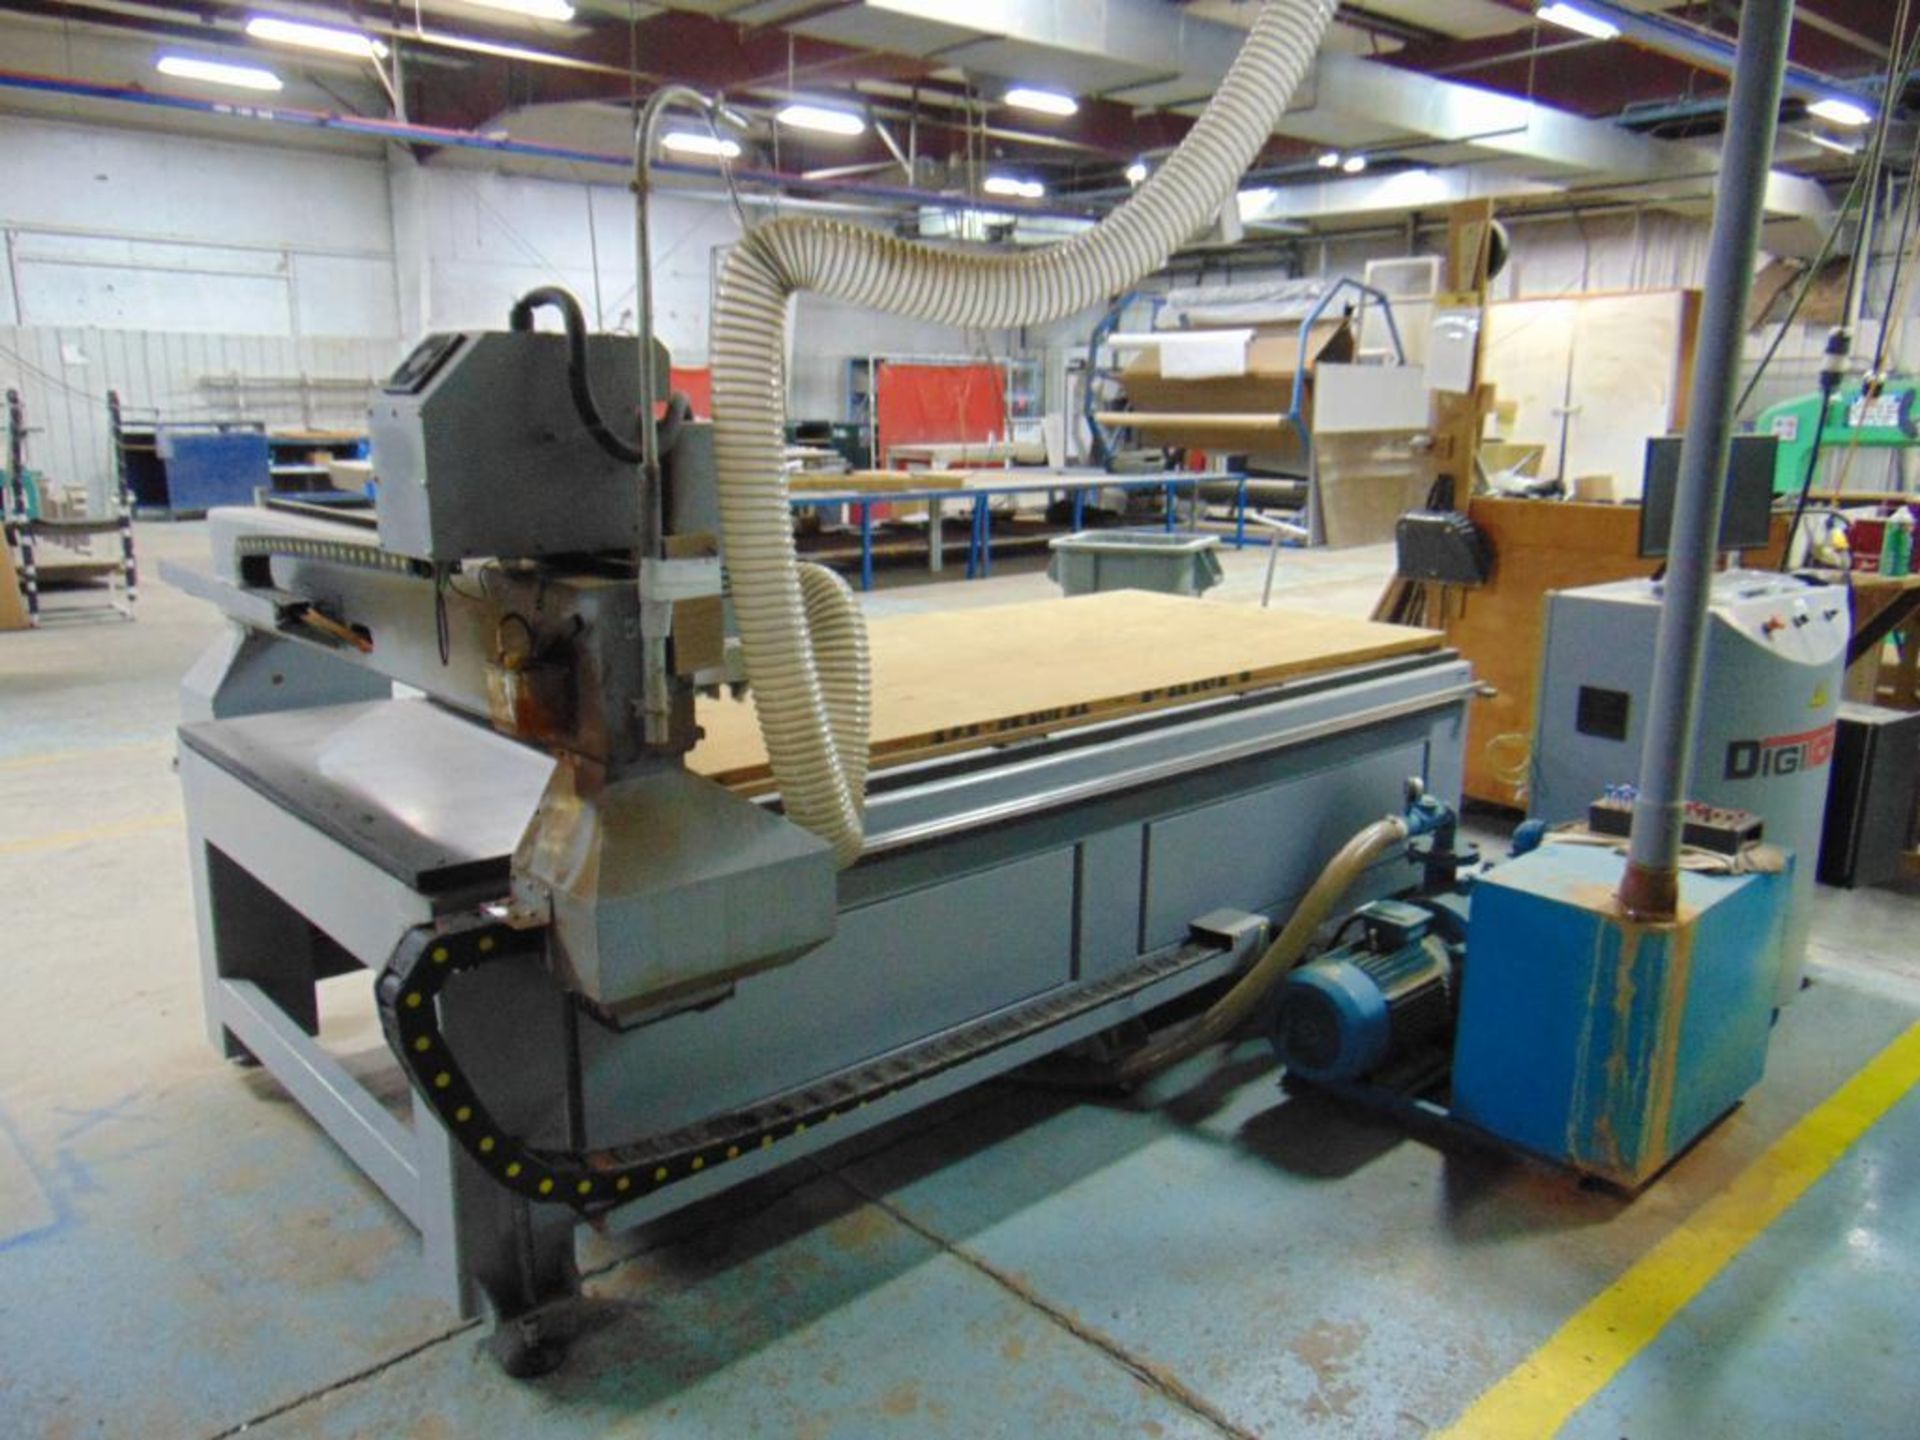 Digitool Model DT408 CNC Router - Image 2 of 9